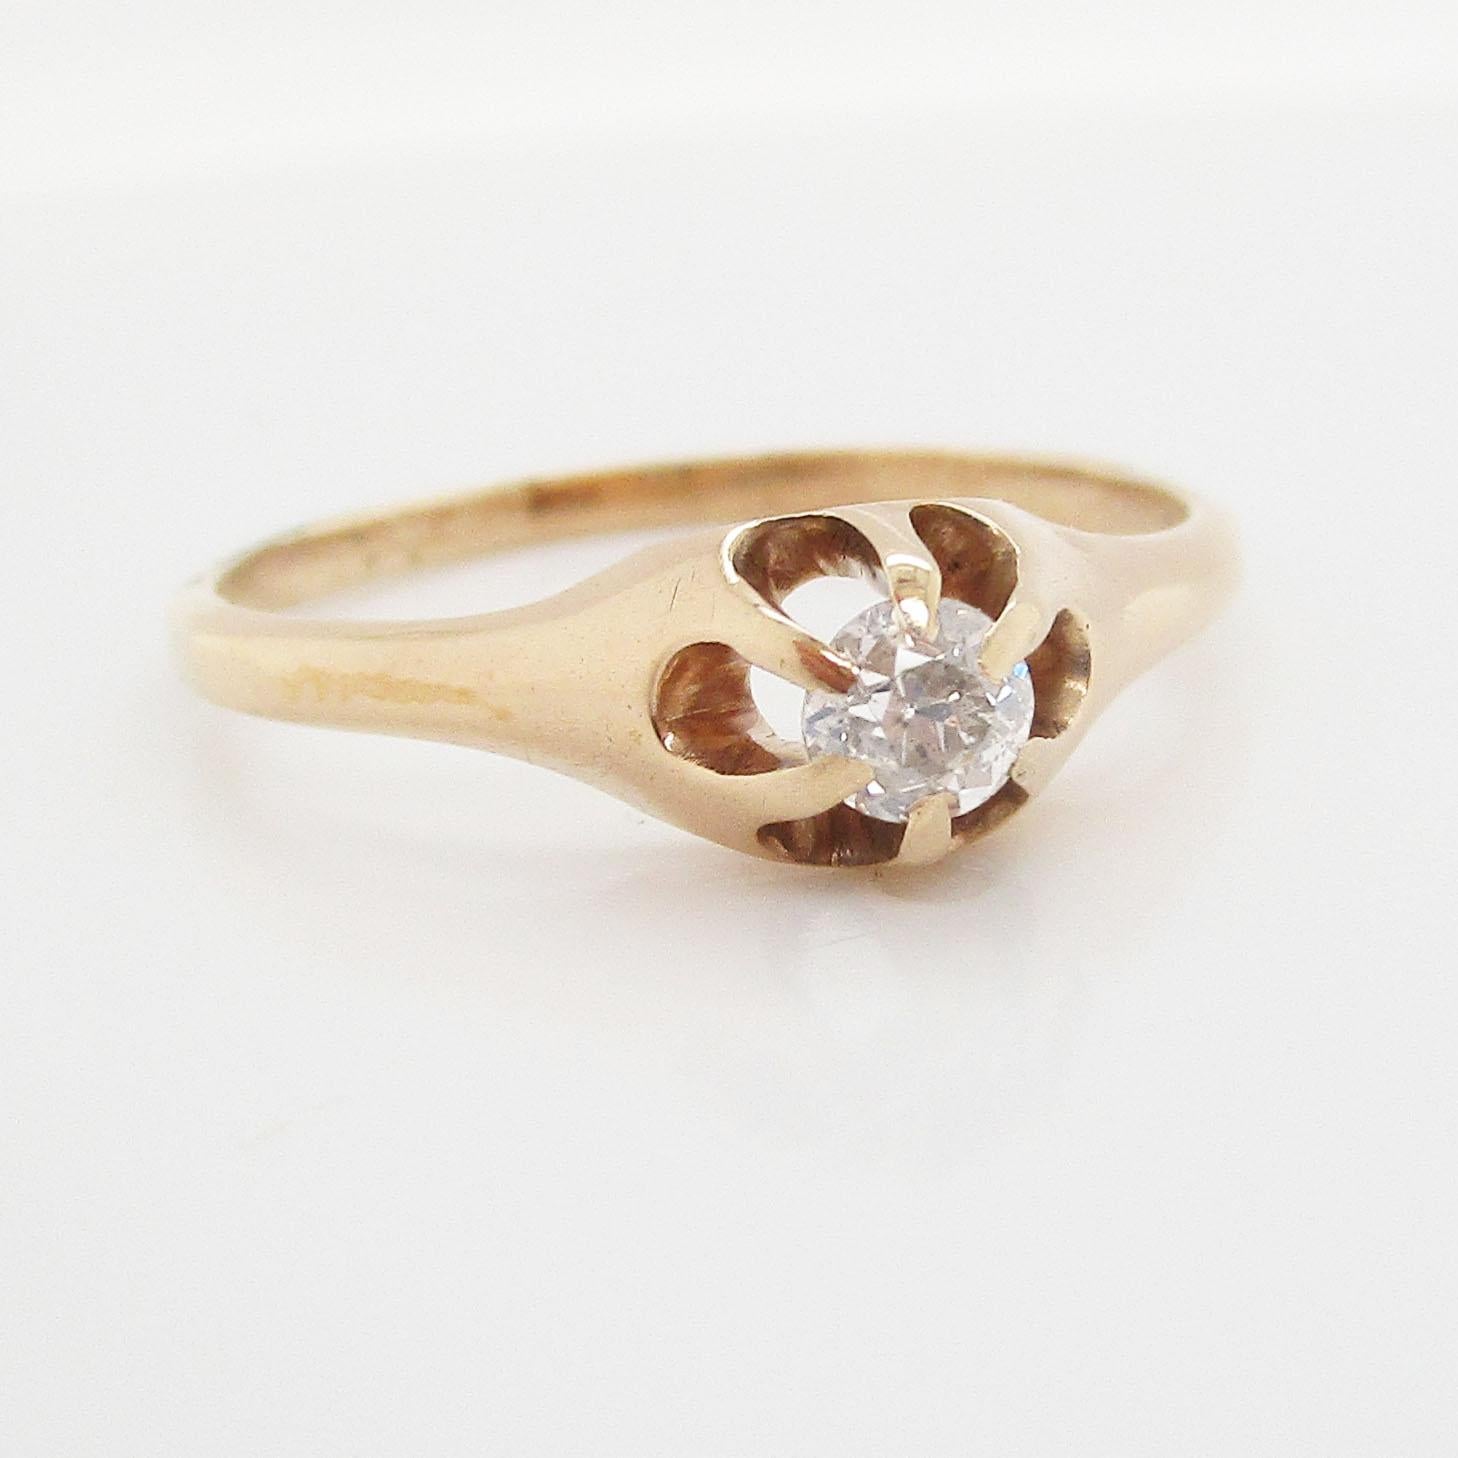 This is an absolutely darling Victorian ring set in 14K rose gold, featuring a lovely Old Mine Cut diamond. Secured in a gorgeous 6-prong setting, this beautiful diamond is 0.15ct and is I/J in color and I1 in clarity. This is a timeless ring that